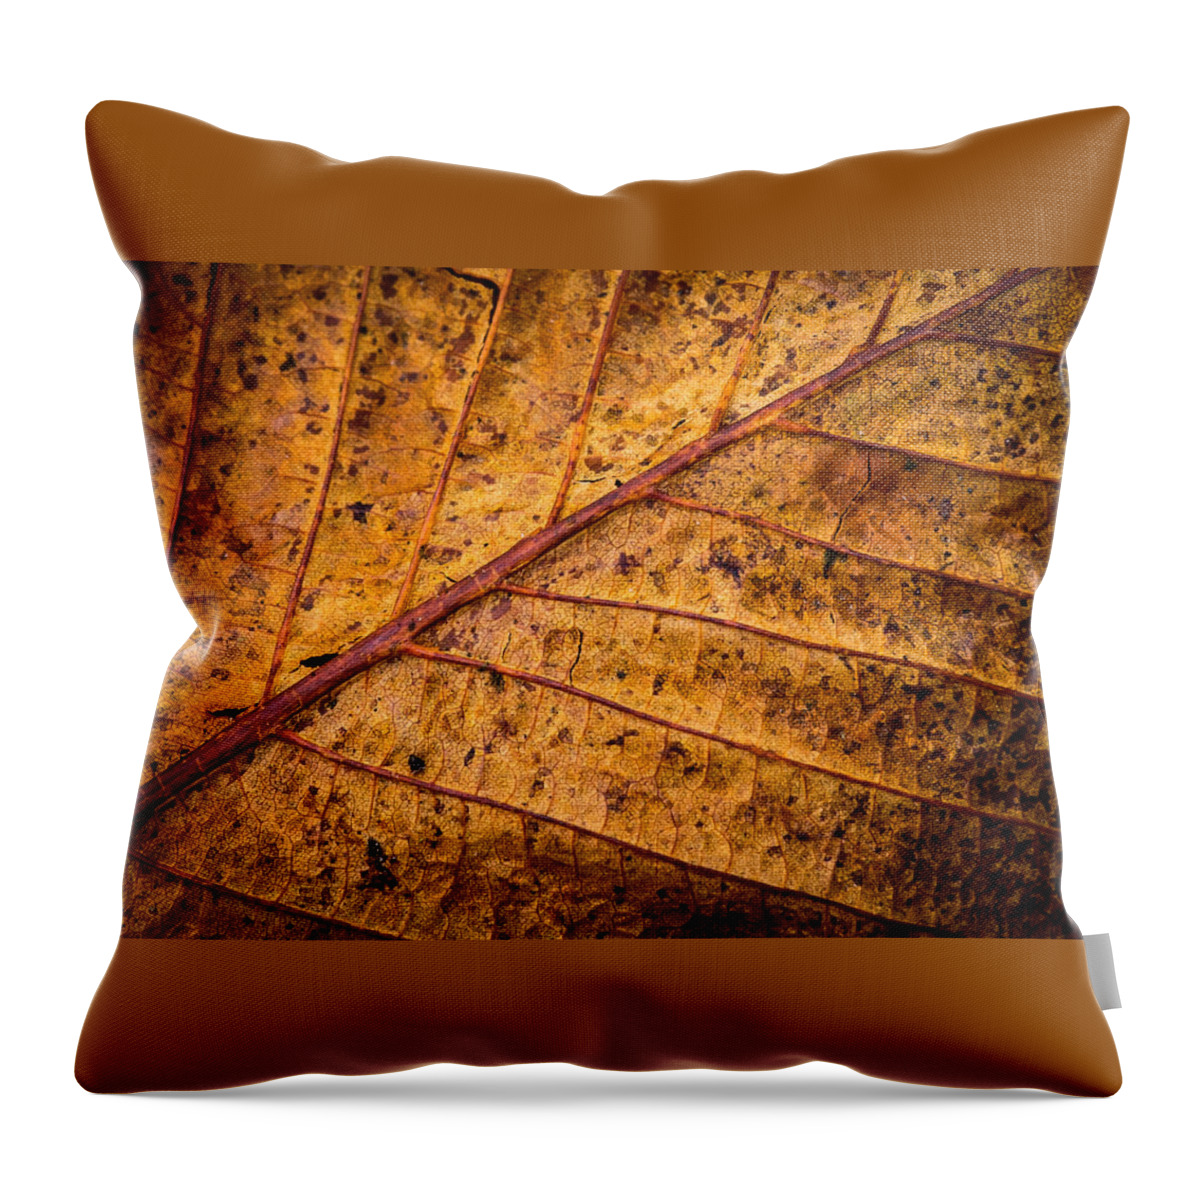 Leaf Throw Pillow featuring the photograph Gold Leaf by Nigel R Bell